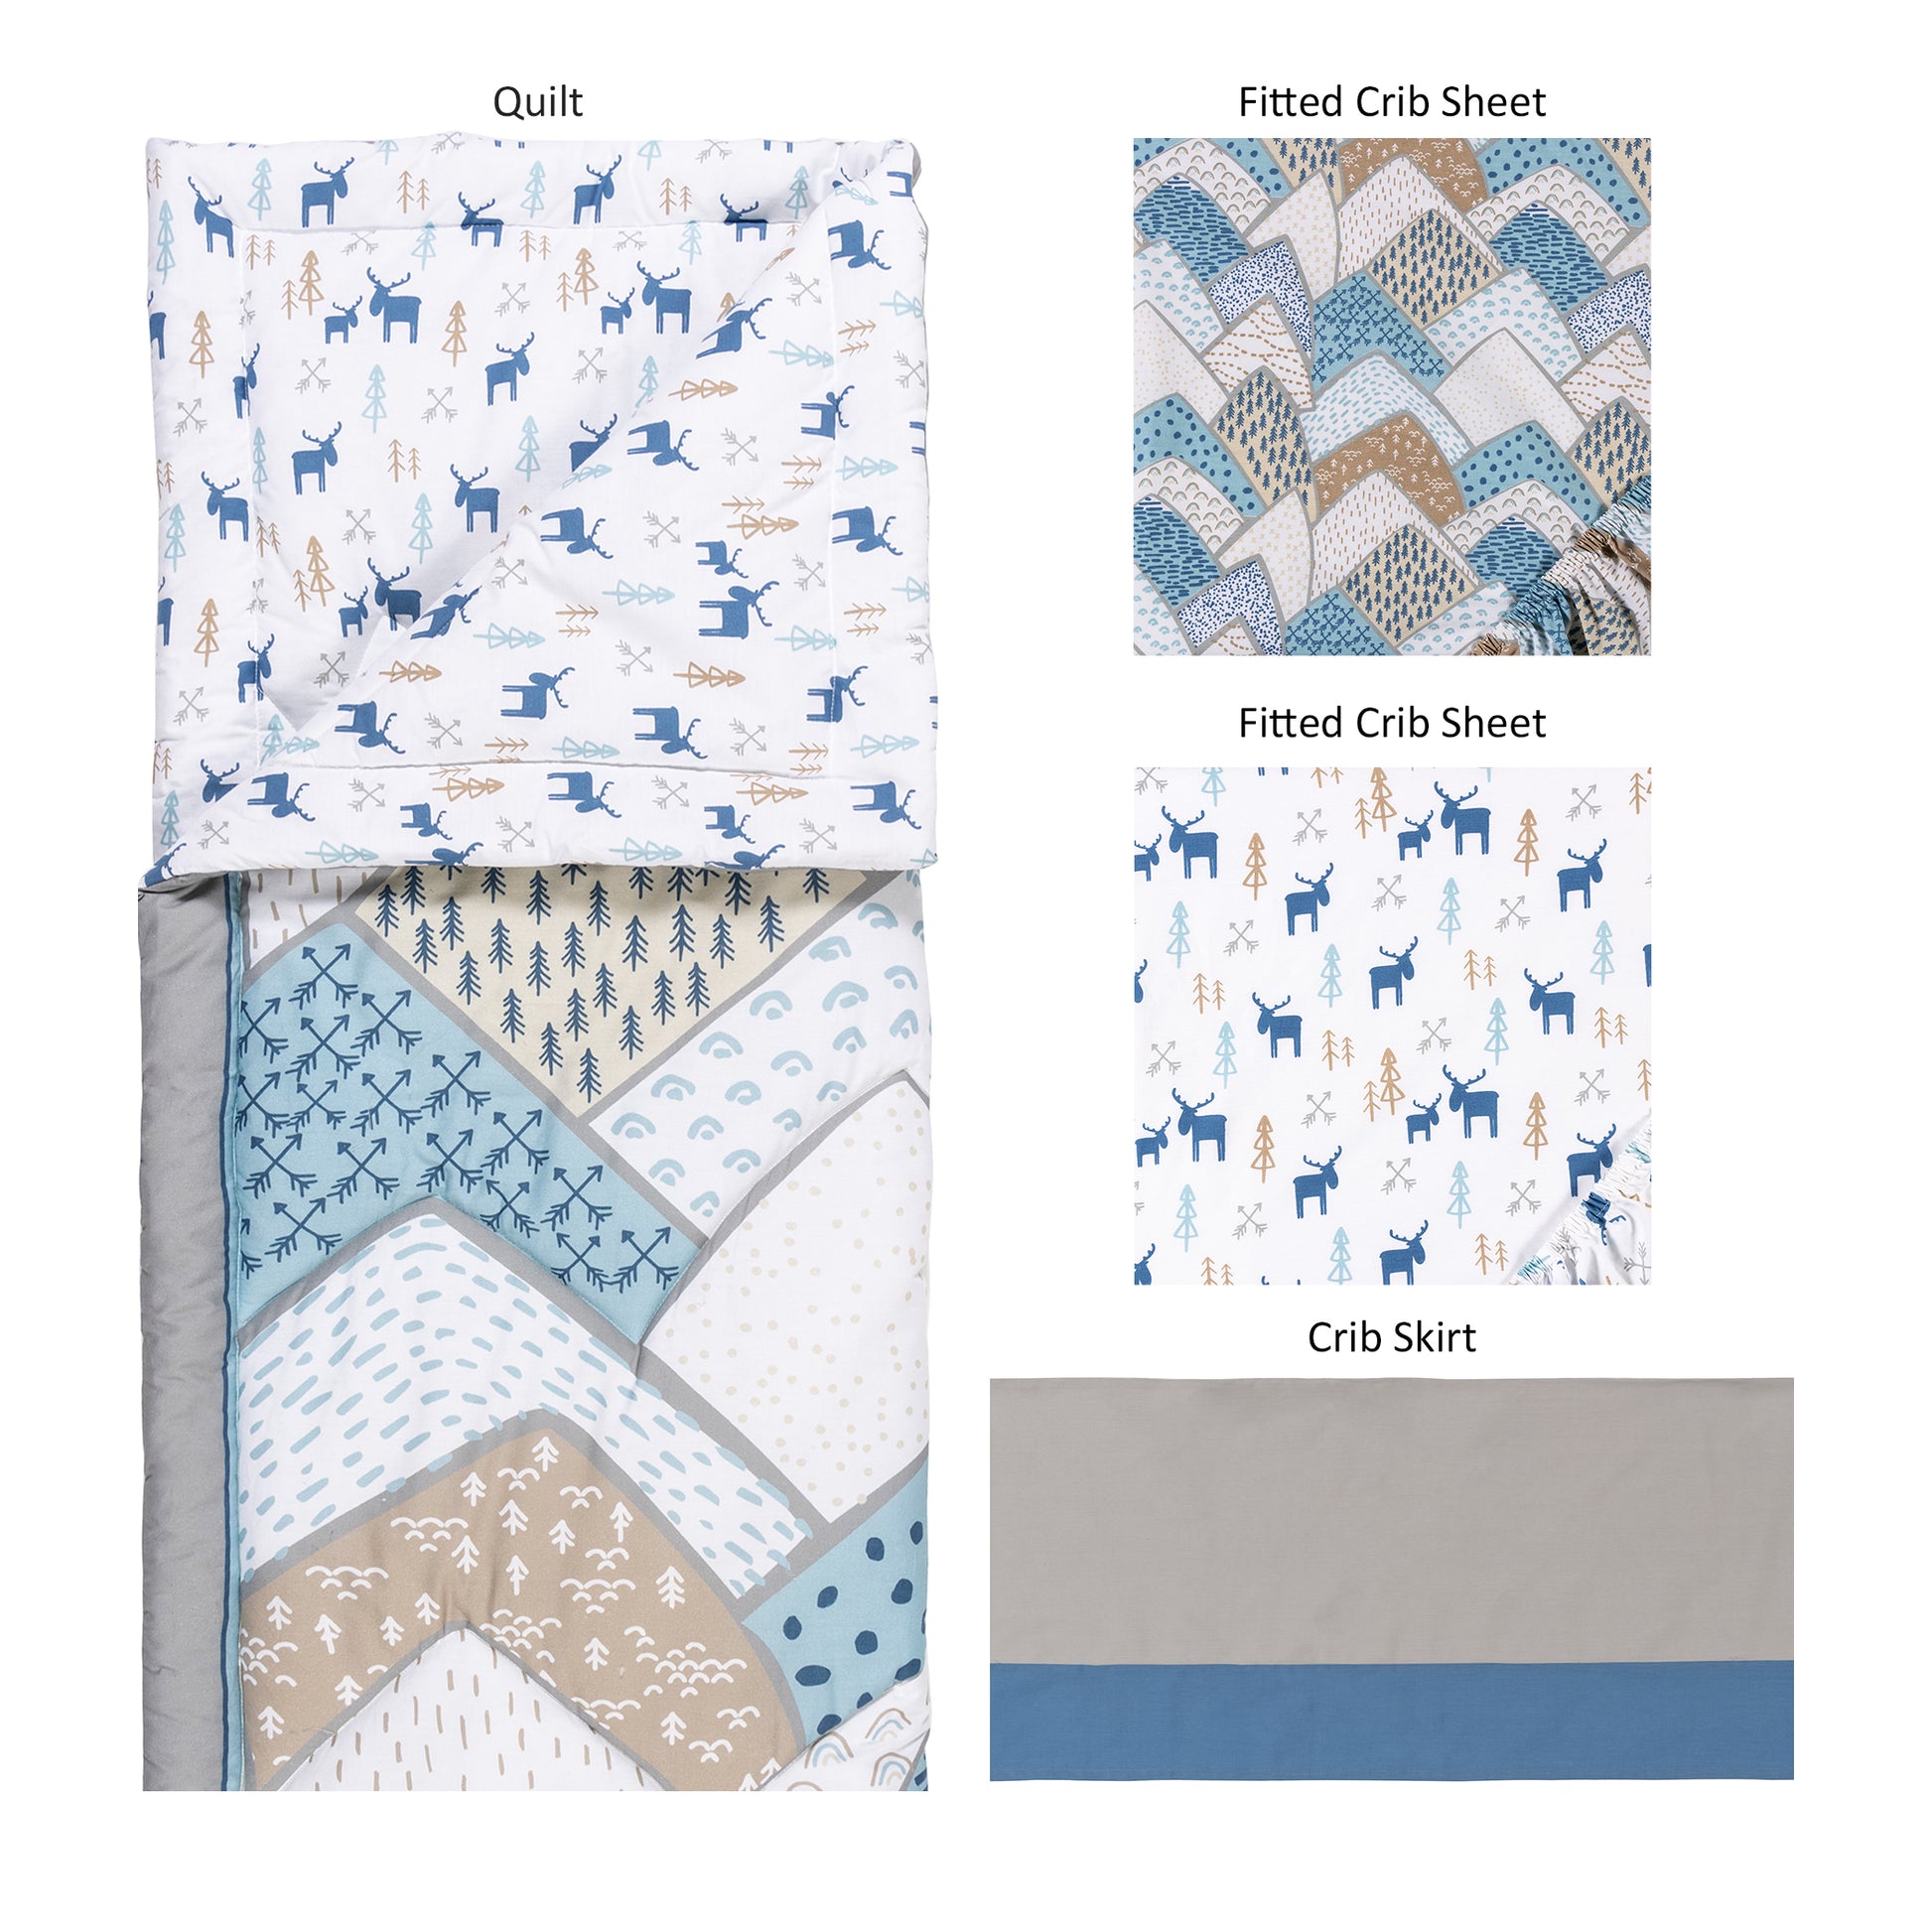 Big Sky 4 Piece Crib Bedding Set- 4 Pieces laid out of crib quilt, 2 crib sheets, and crib skirt